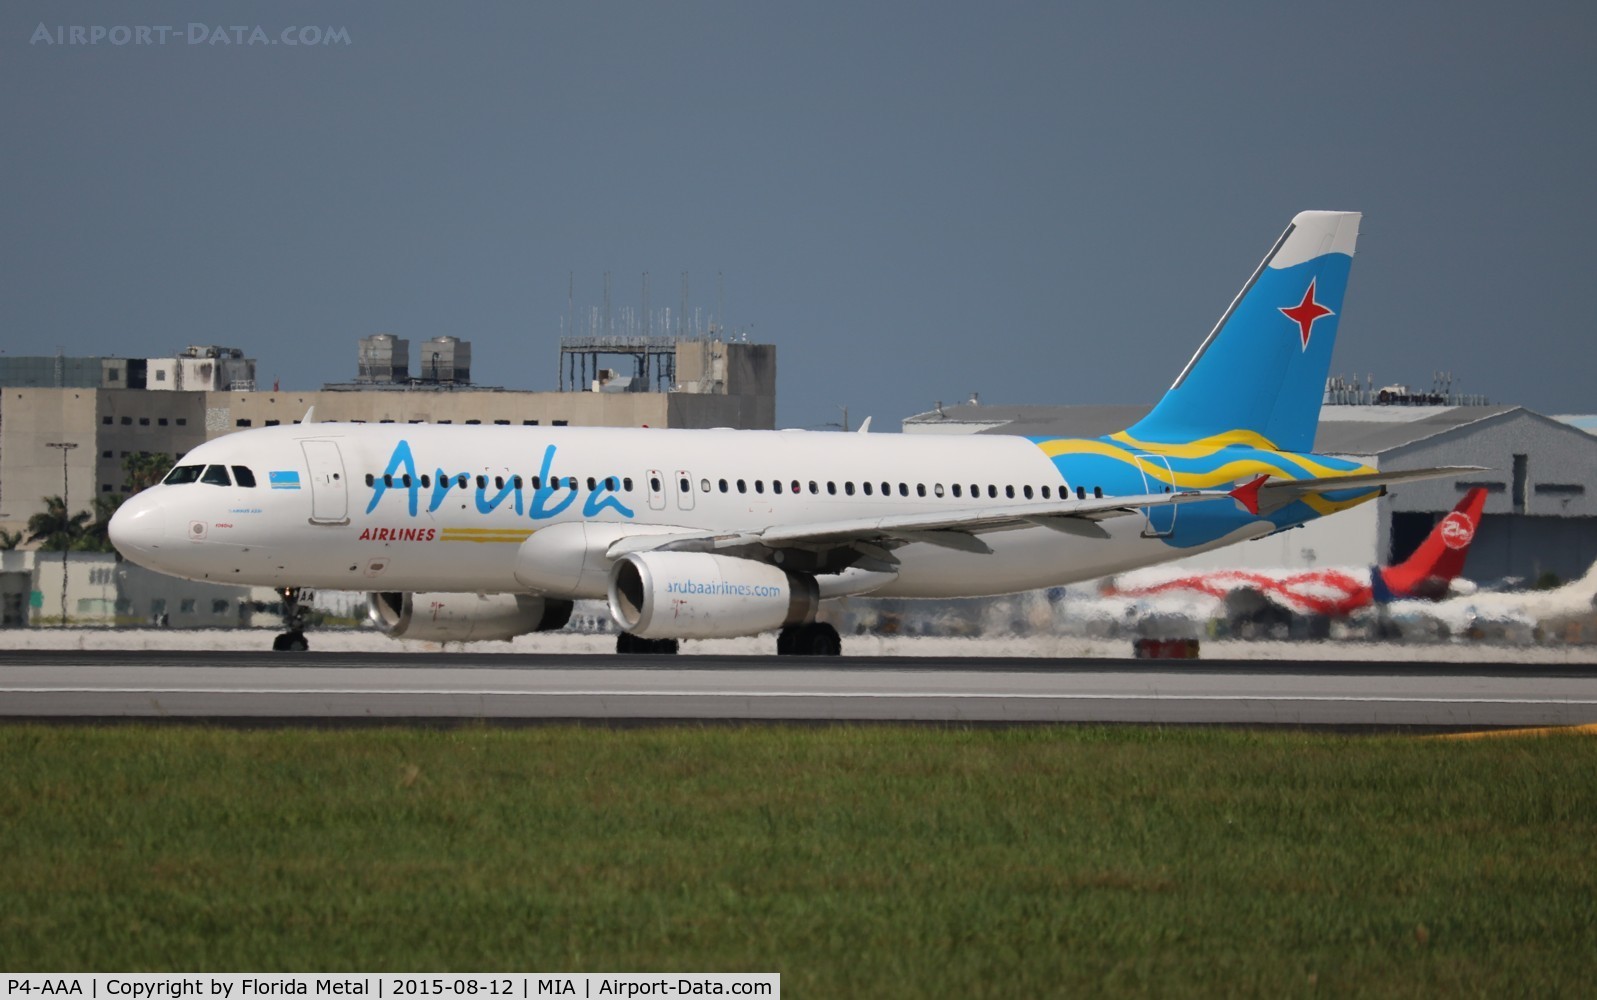 P4-AAA, 1996 Airbus A320-232 C/N 582, Aruba Airlines